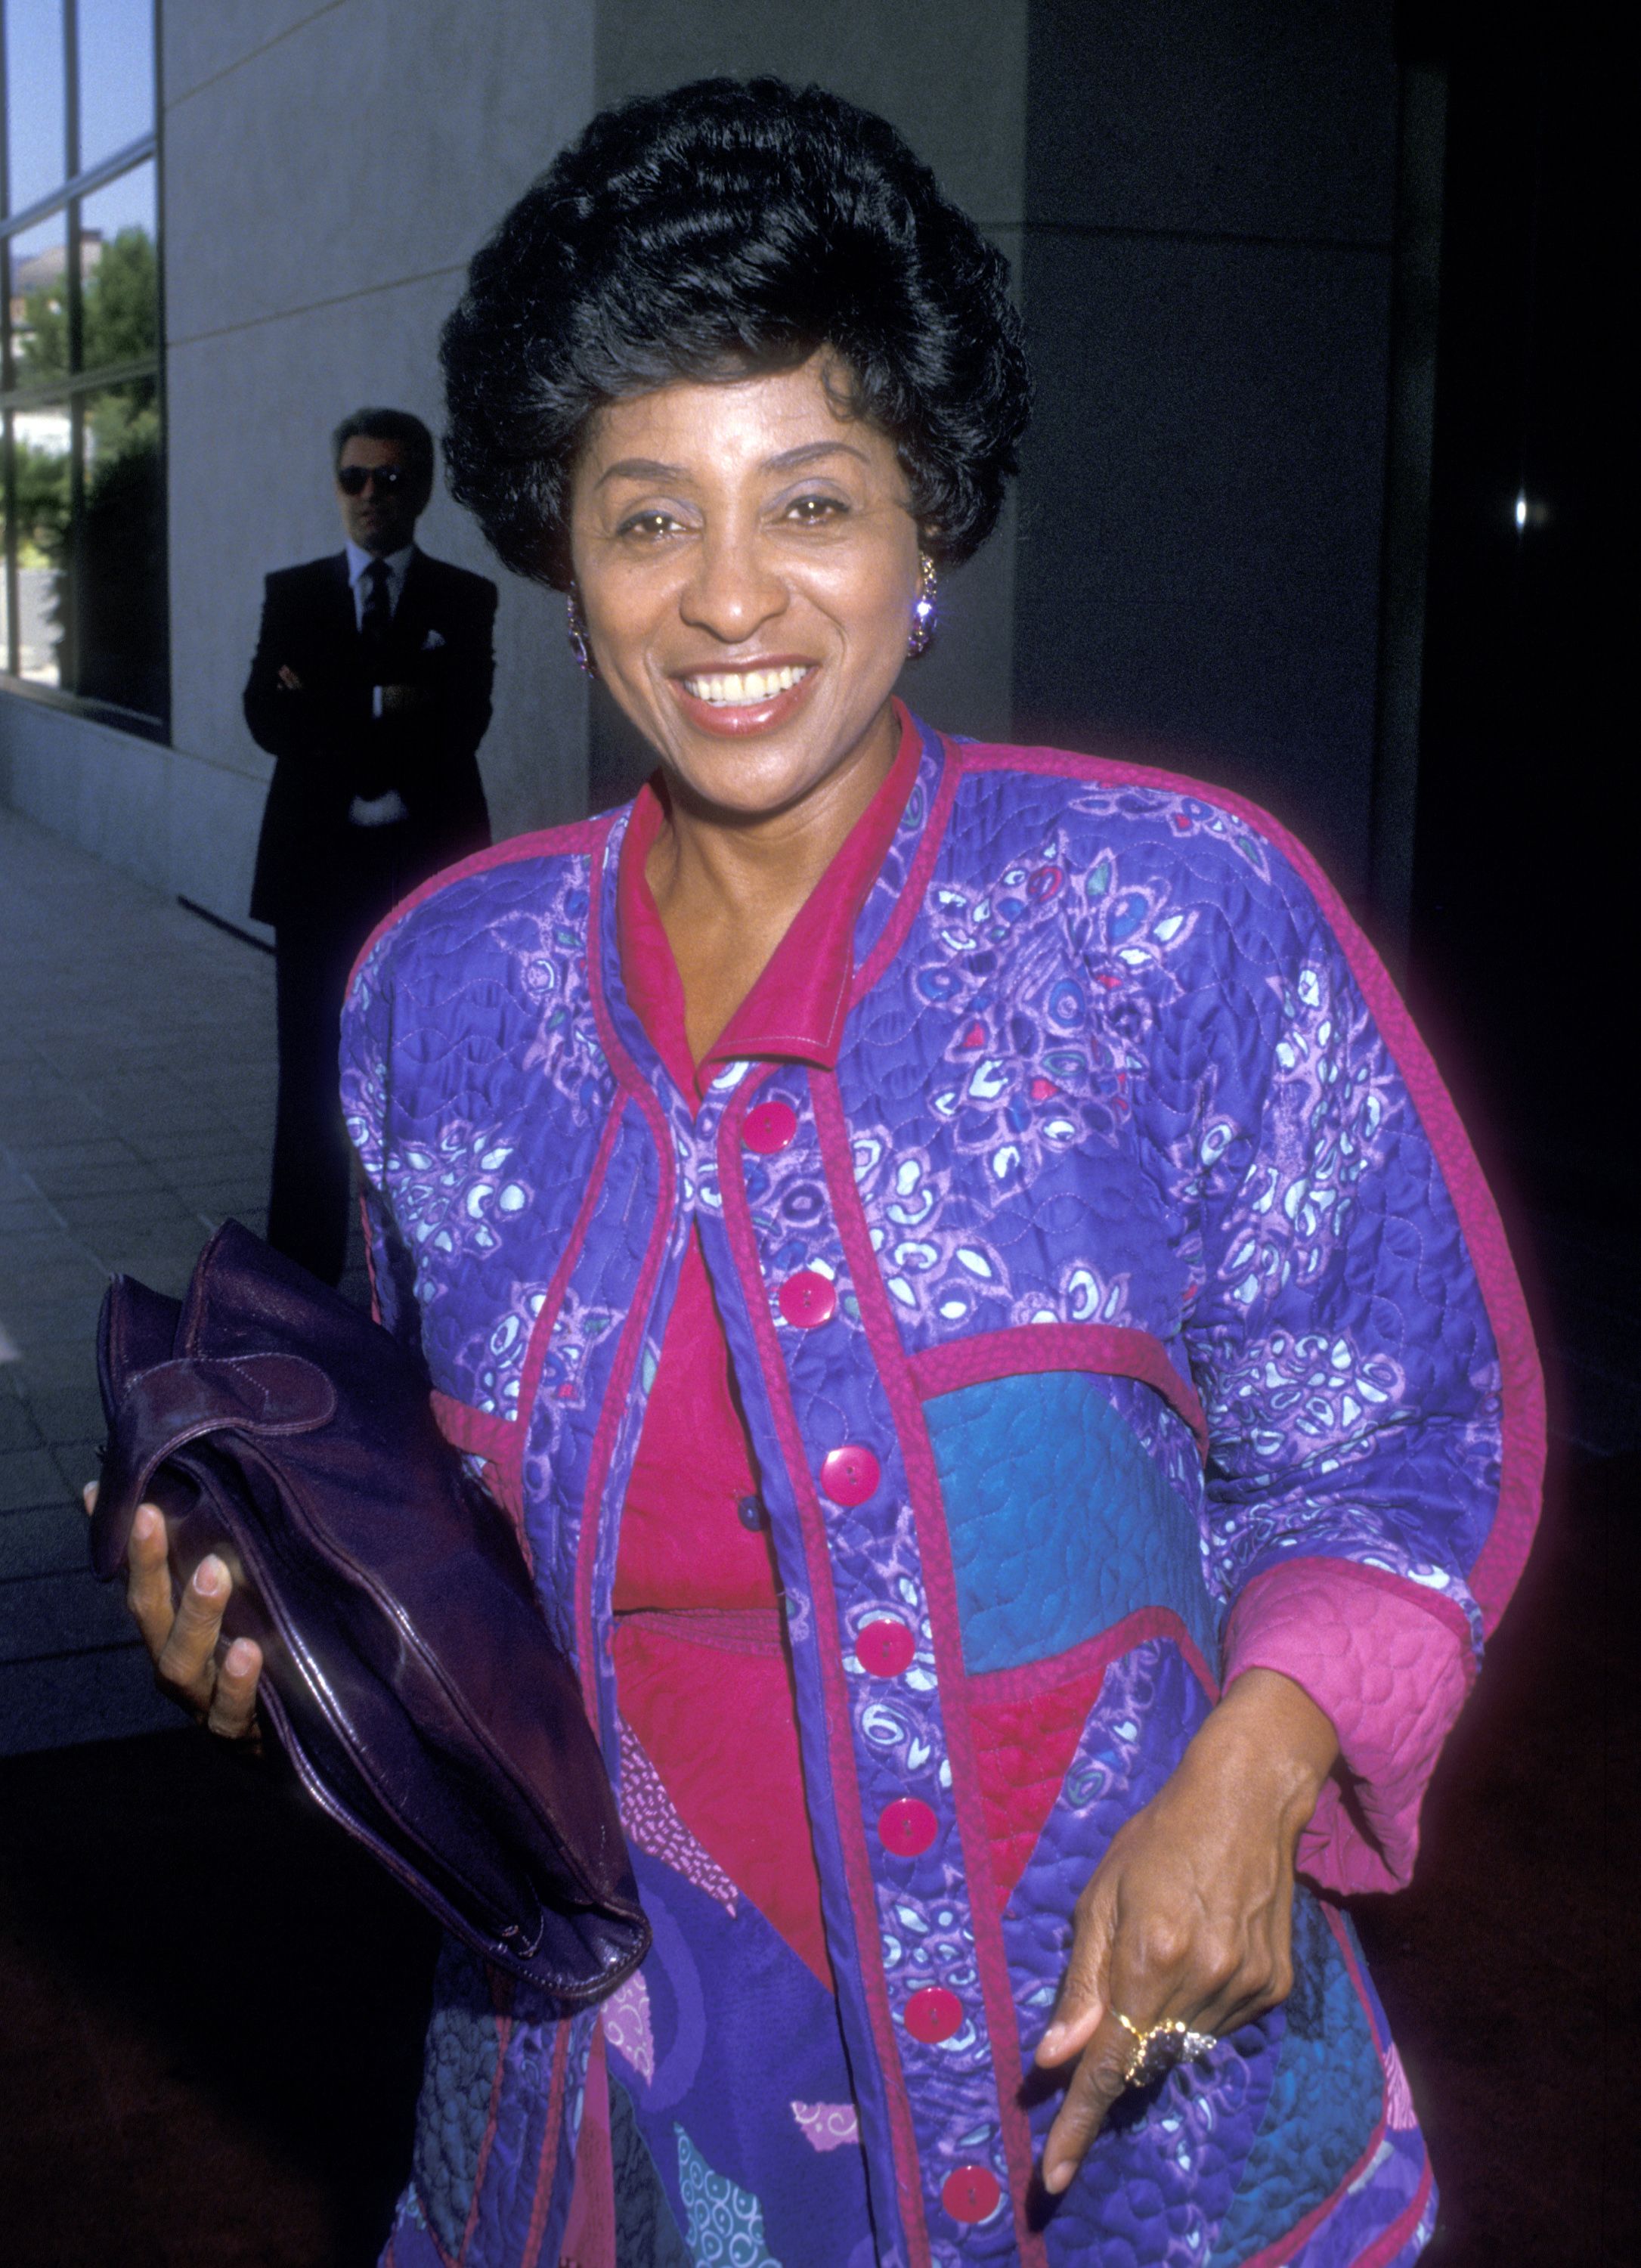 Actress Marla Gibbs at the NBC Television Affiliates Party on August 7, 1988 at The Registry Hotel in Universal City, California. | Photo: Getty Images